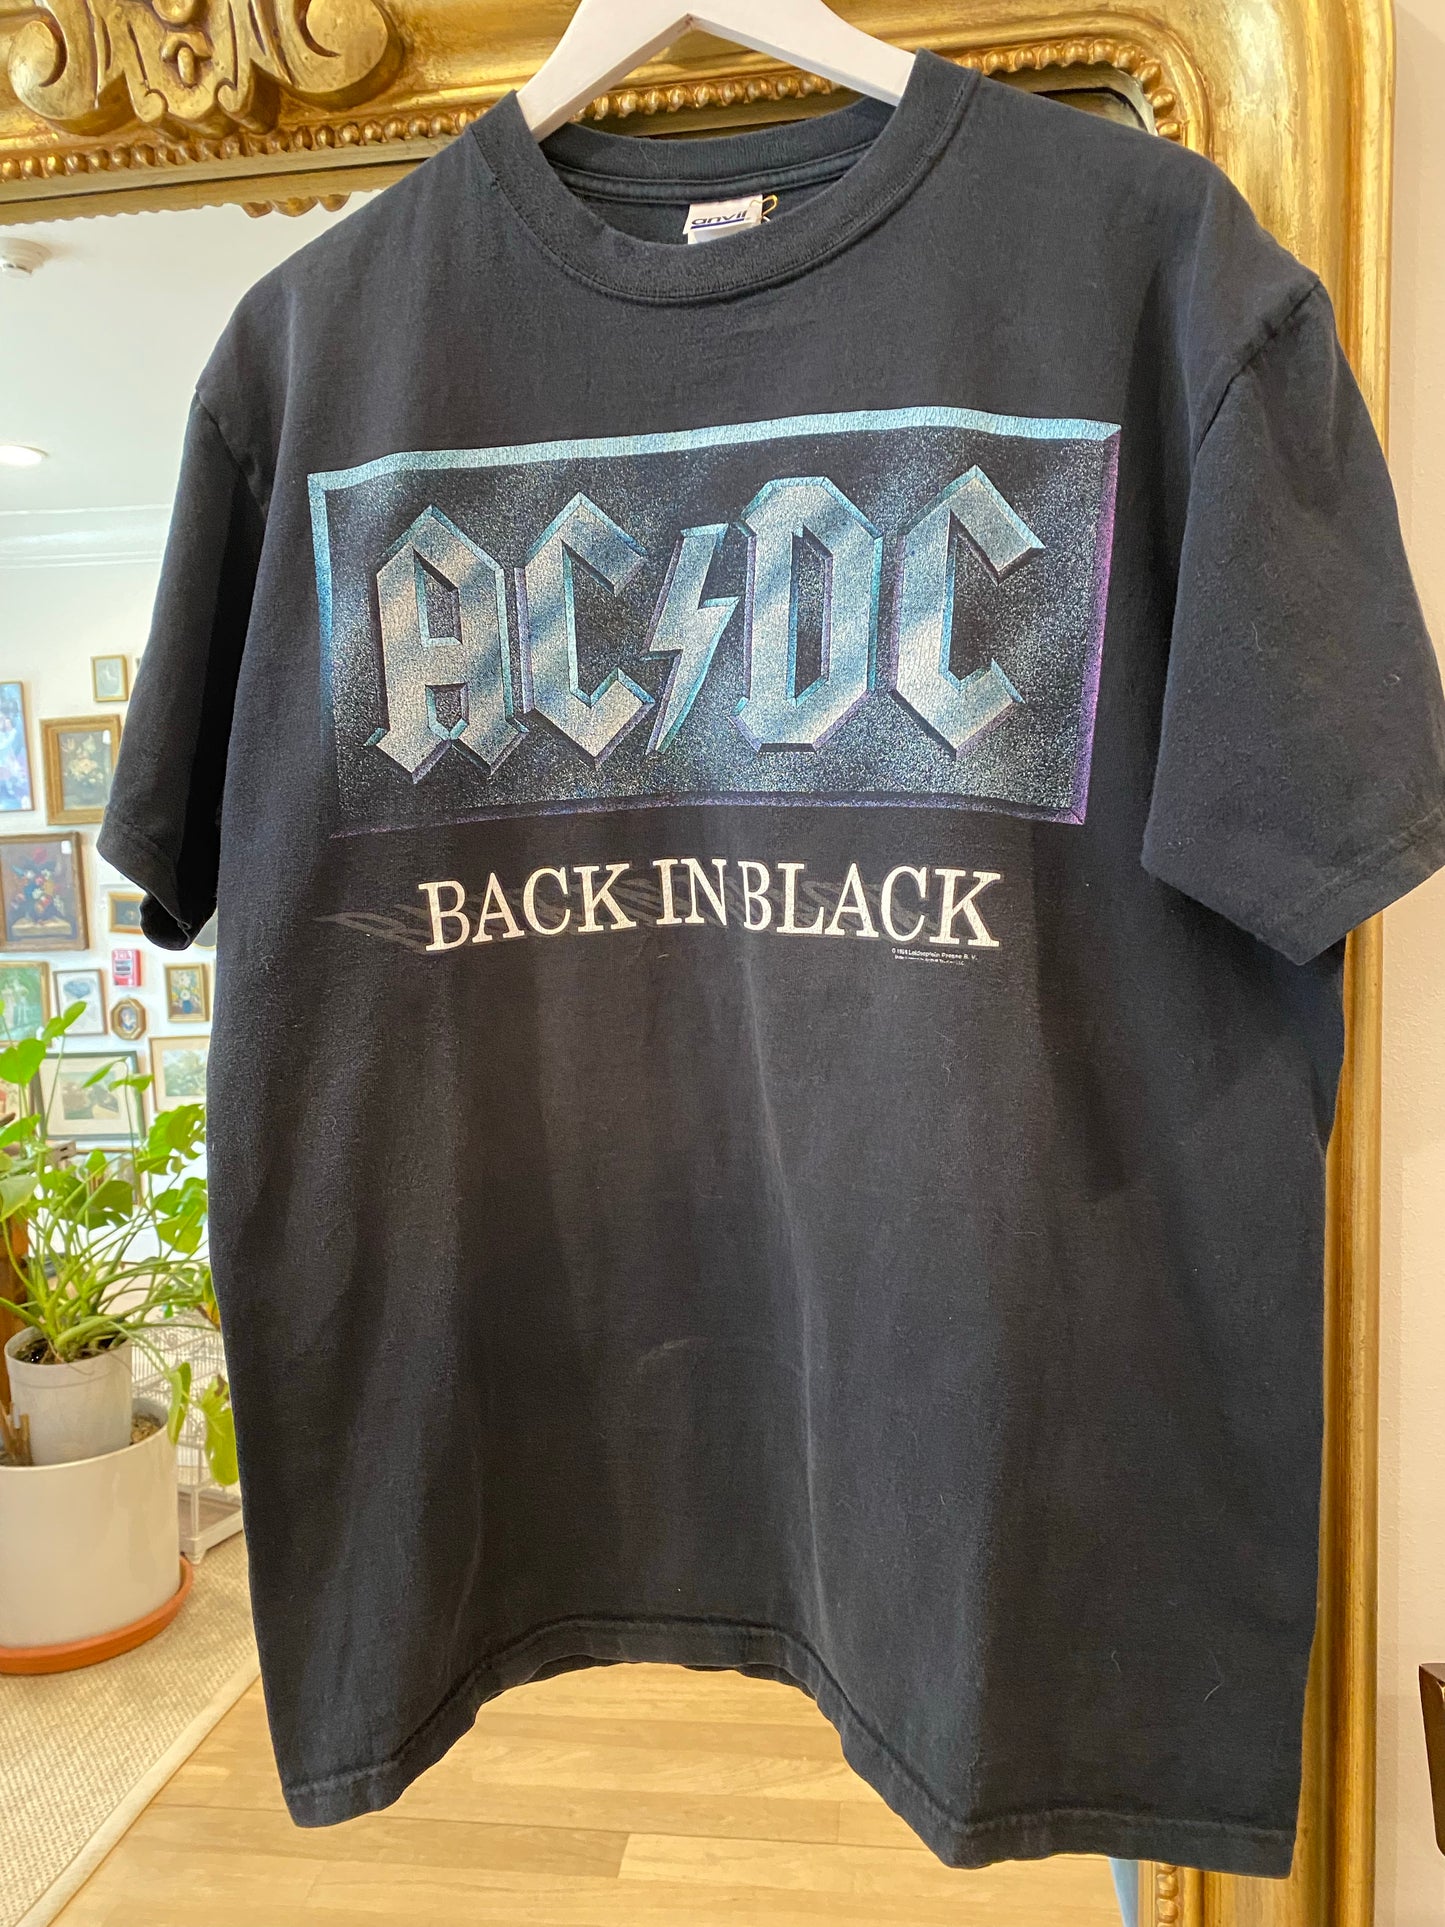 ACDC Back in Black Tee Shirt, 1996